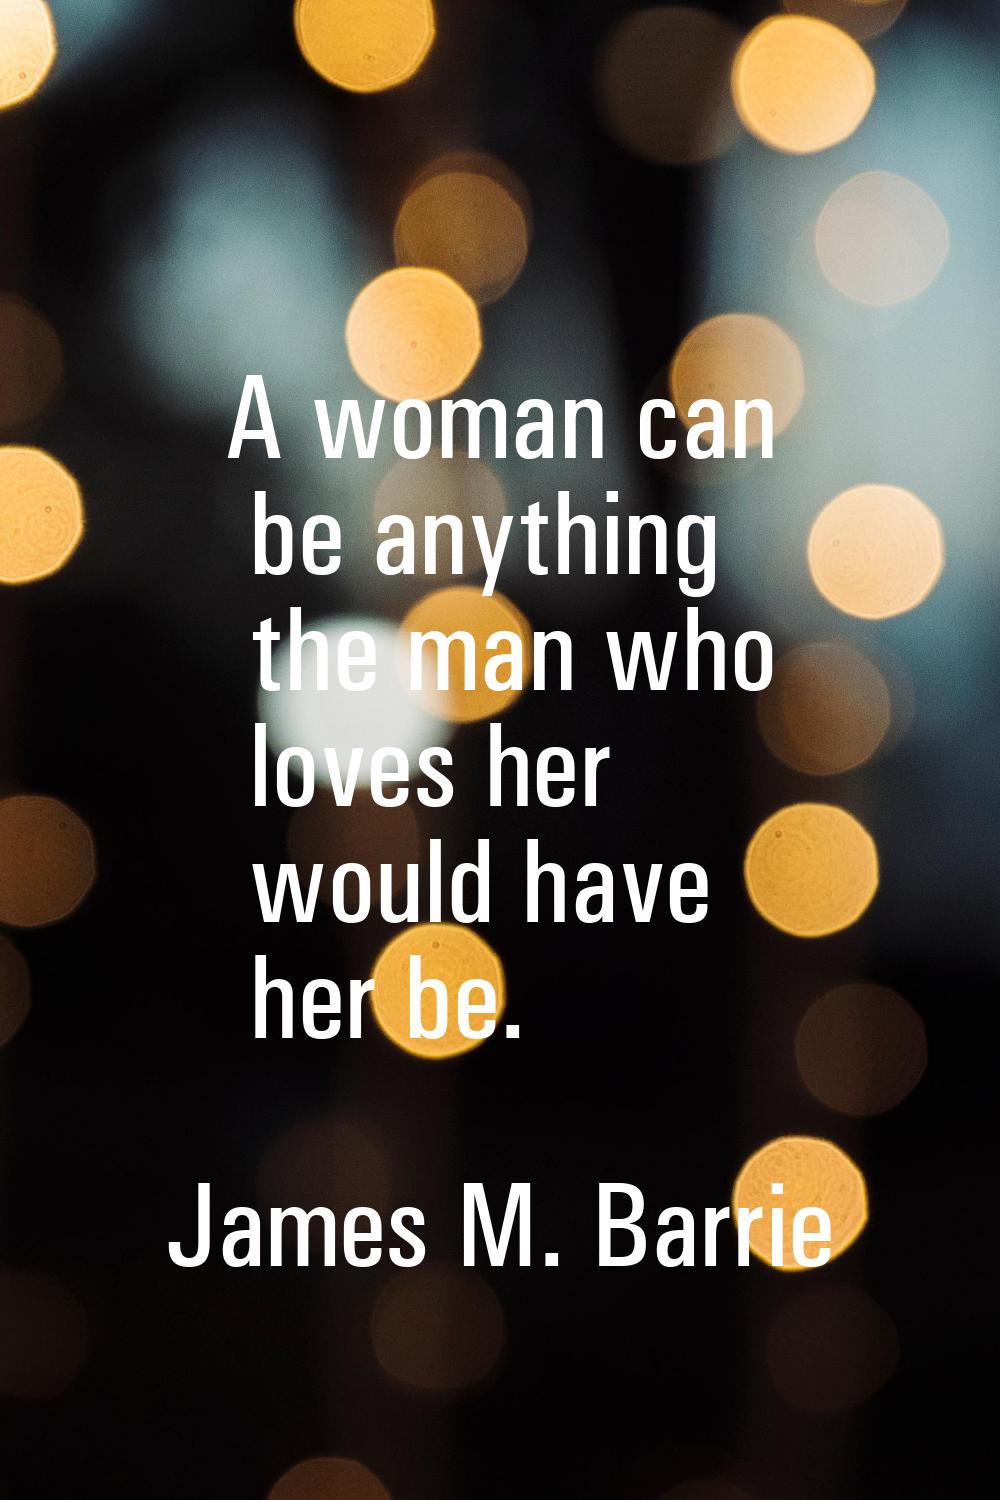 A woman can be anything the man who loves her would have her be.